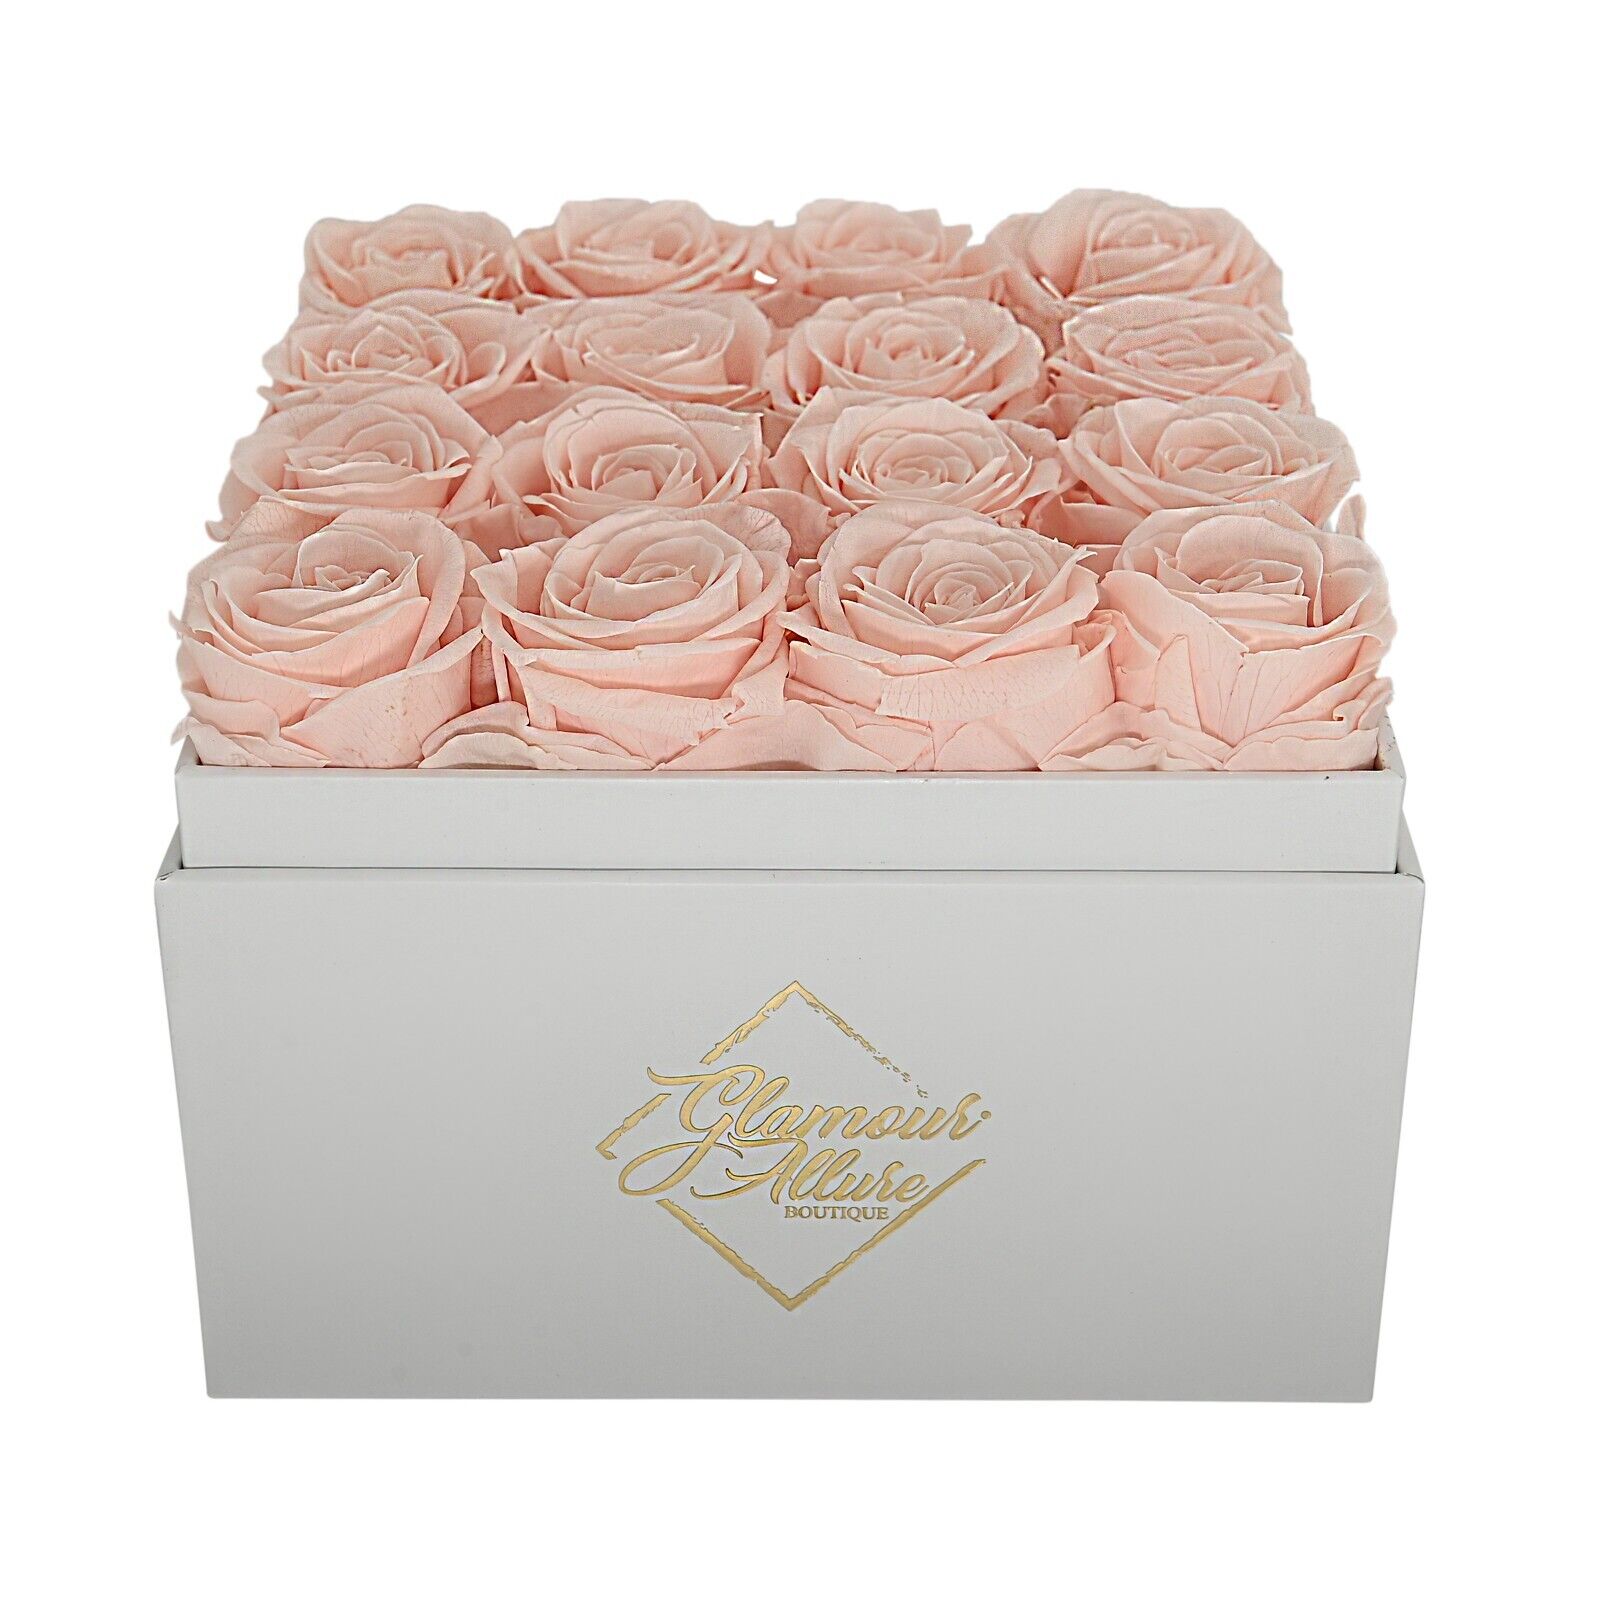 Handmade Preserved Real Roses in a Gift Box - 16 roses - Preserved Flowers Glamour Allure Boutoque - фотография #6